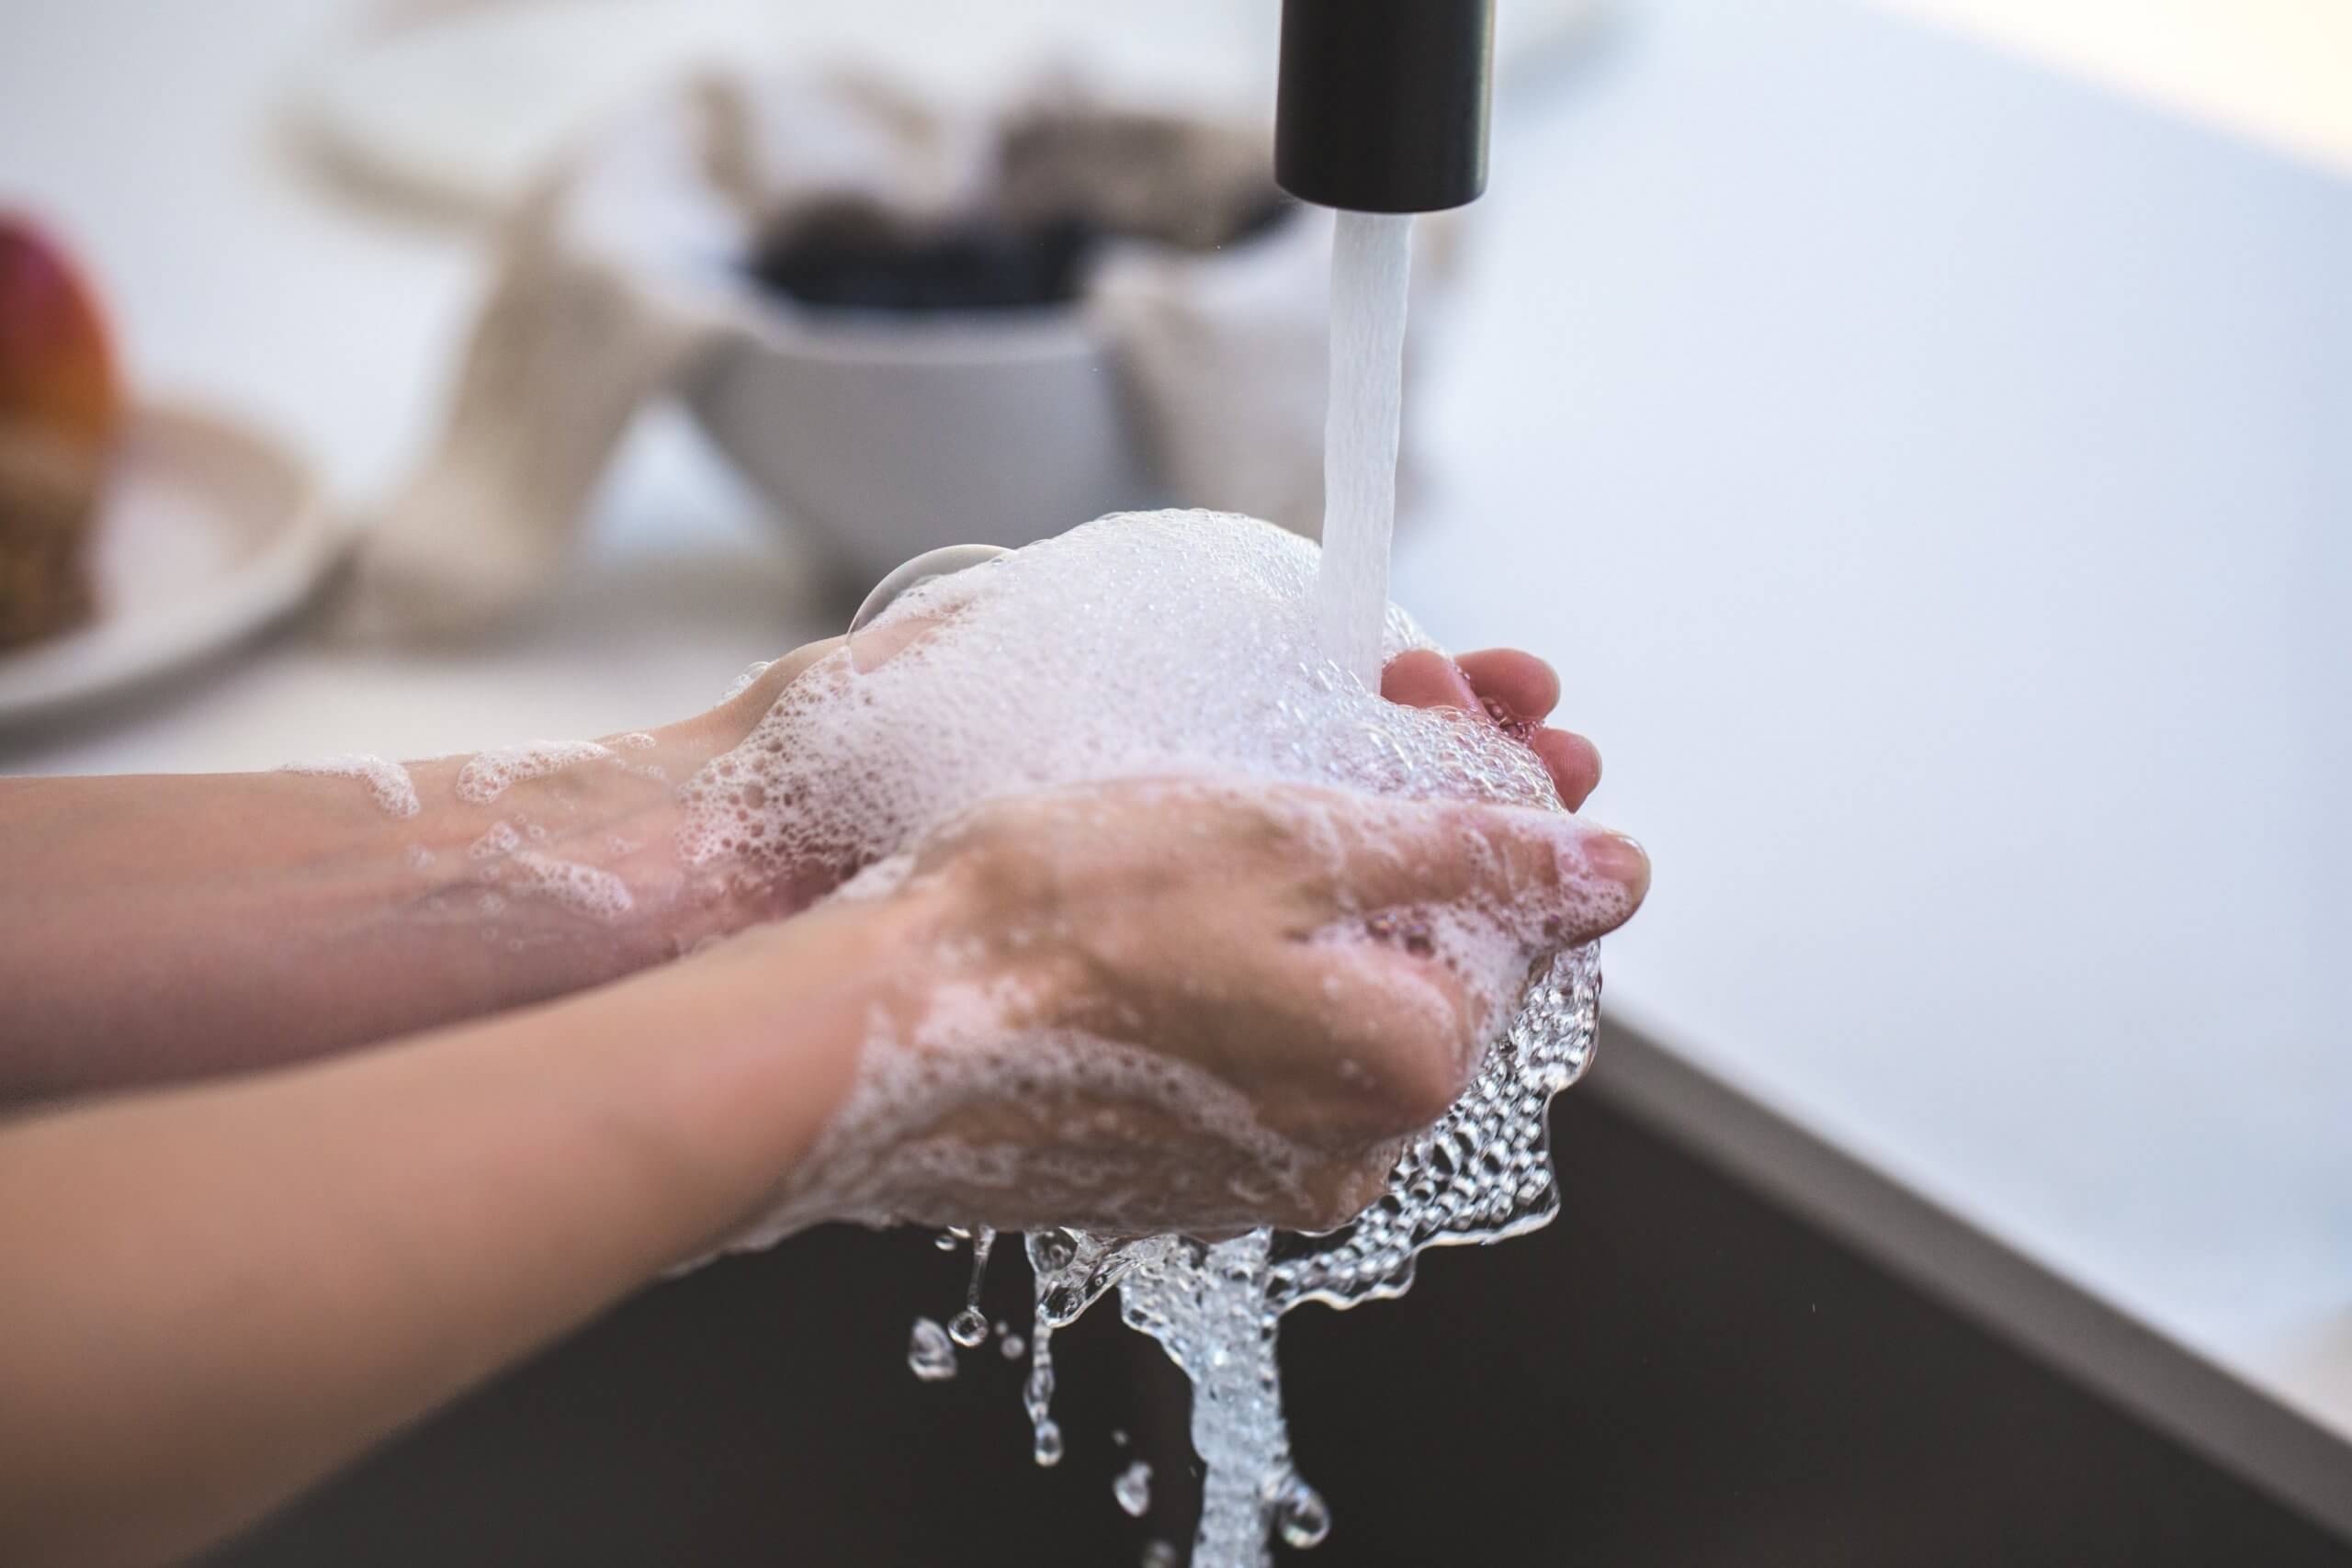 Hands being washed with soap under a running tap